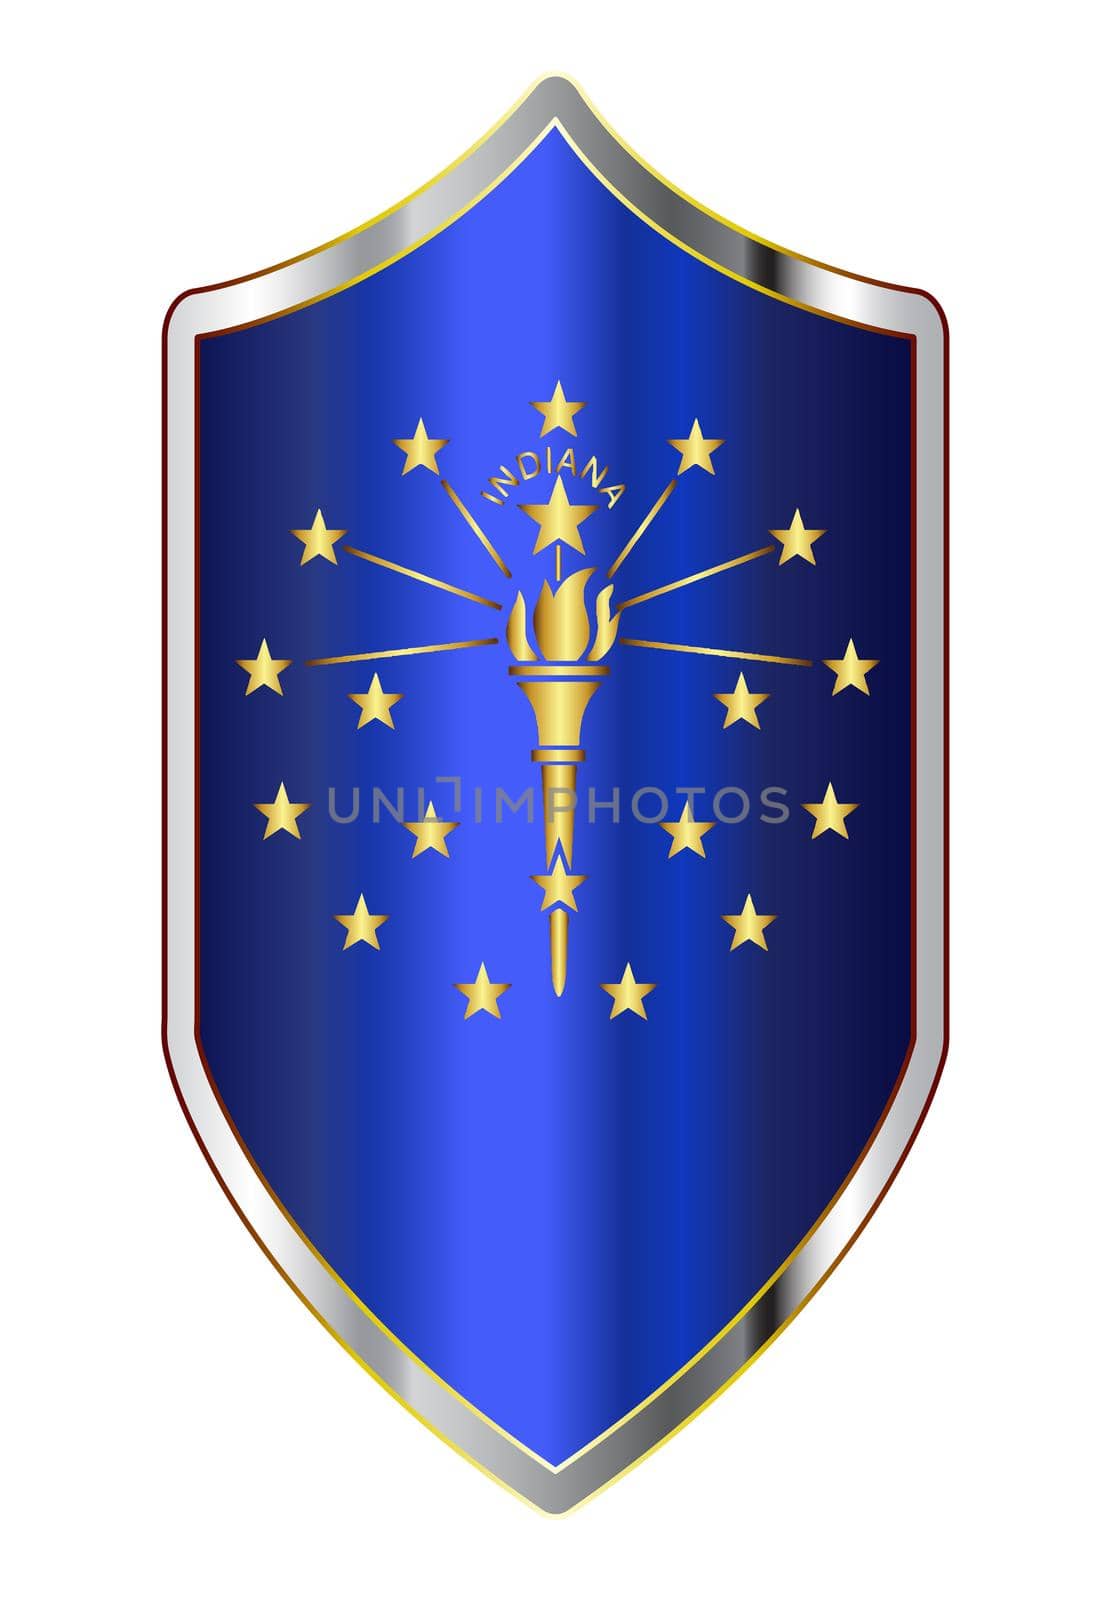 A typical crusader type shield with the state flag of Indiana all isolated on a white background